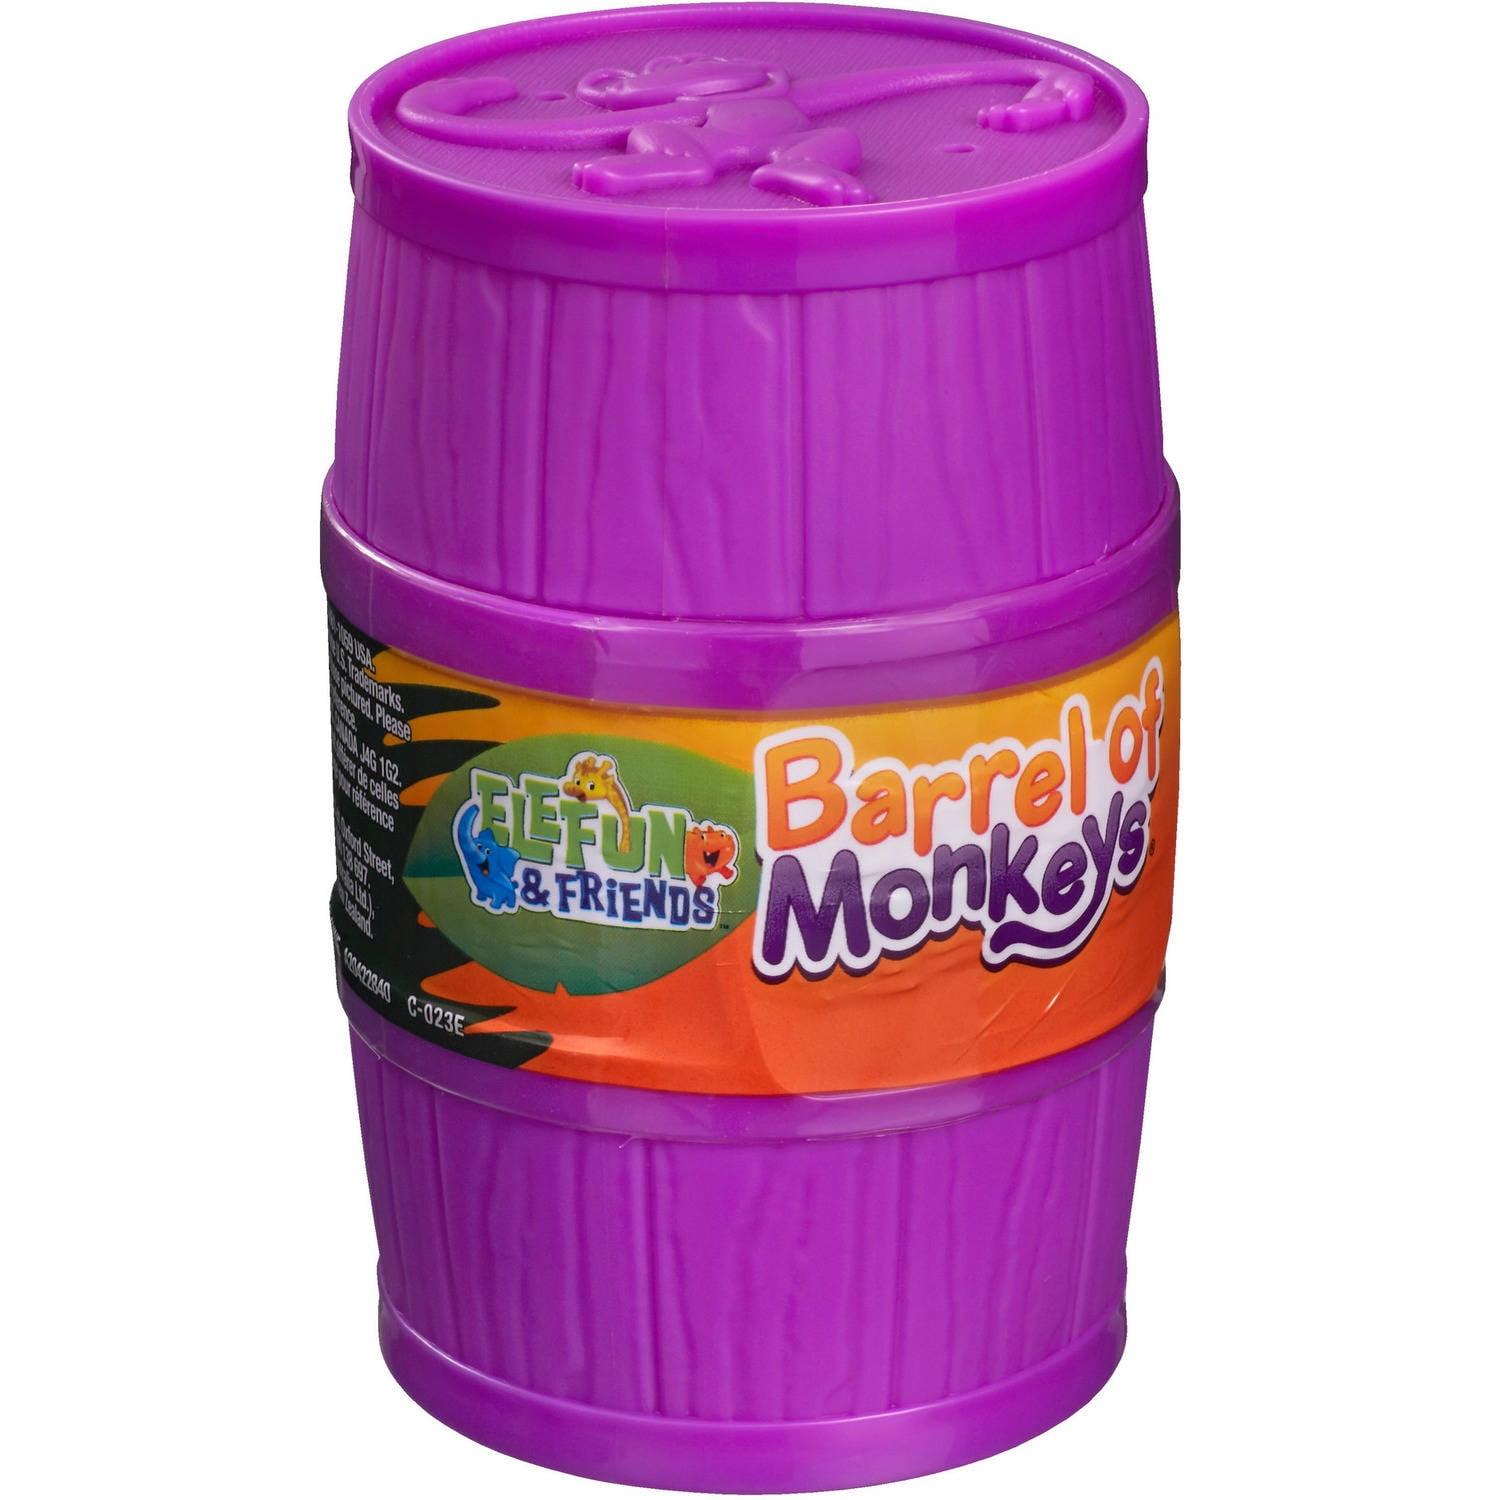 Barrel of Monkeys 2012 Classic Version  Factory Sealed Purple Container  